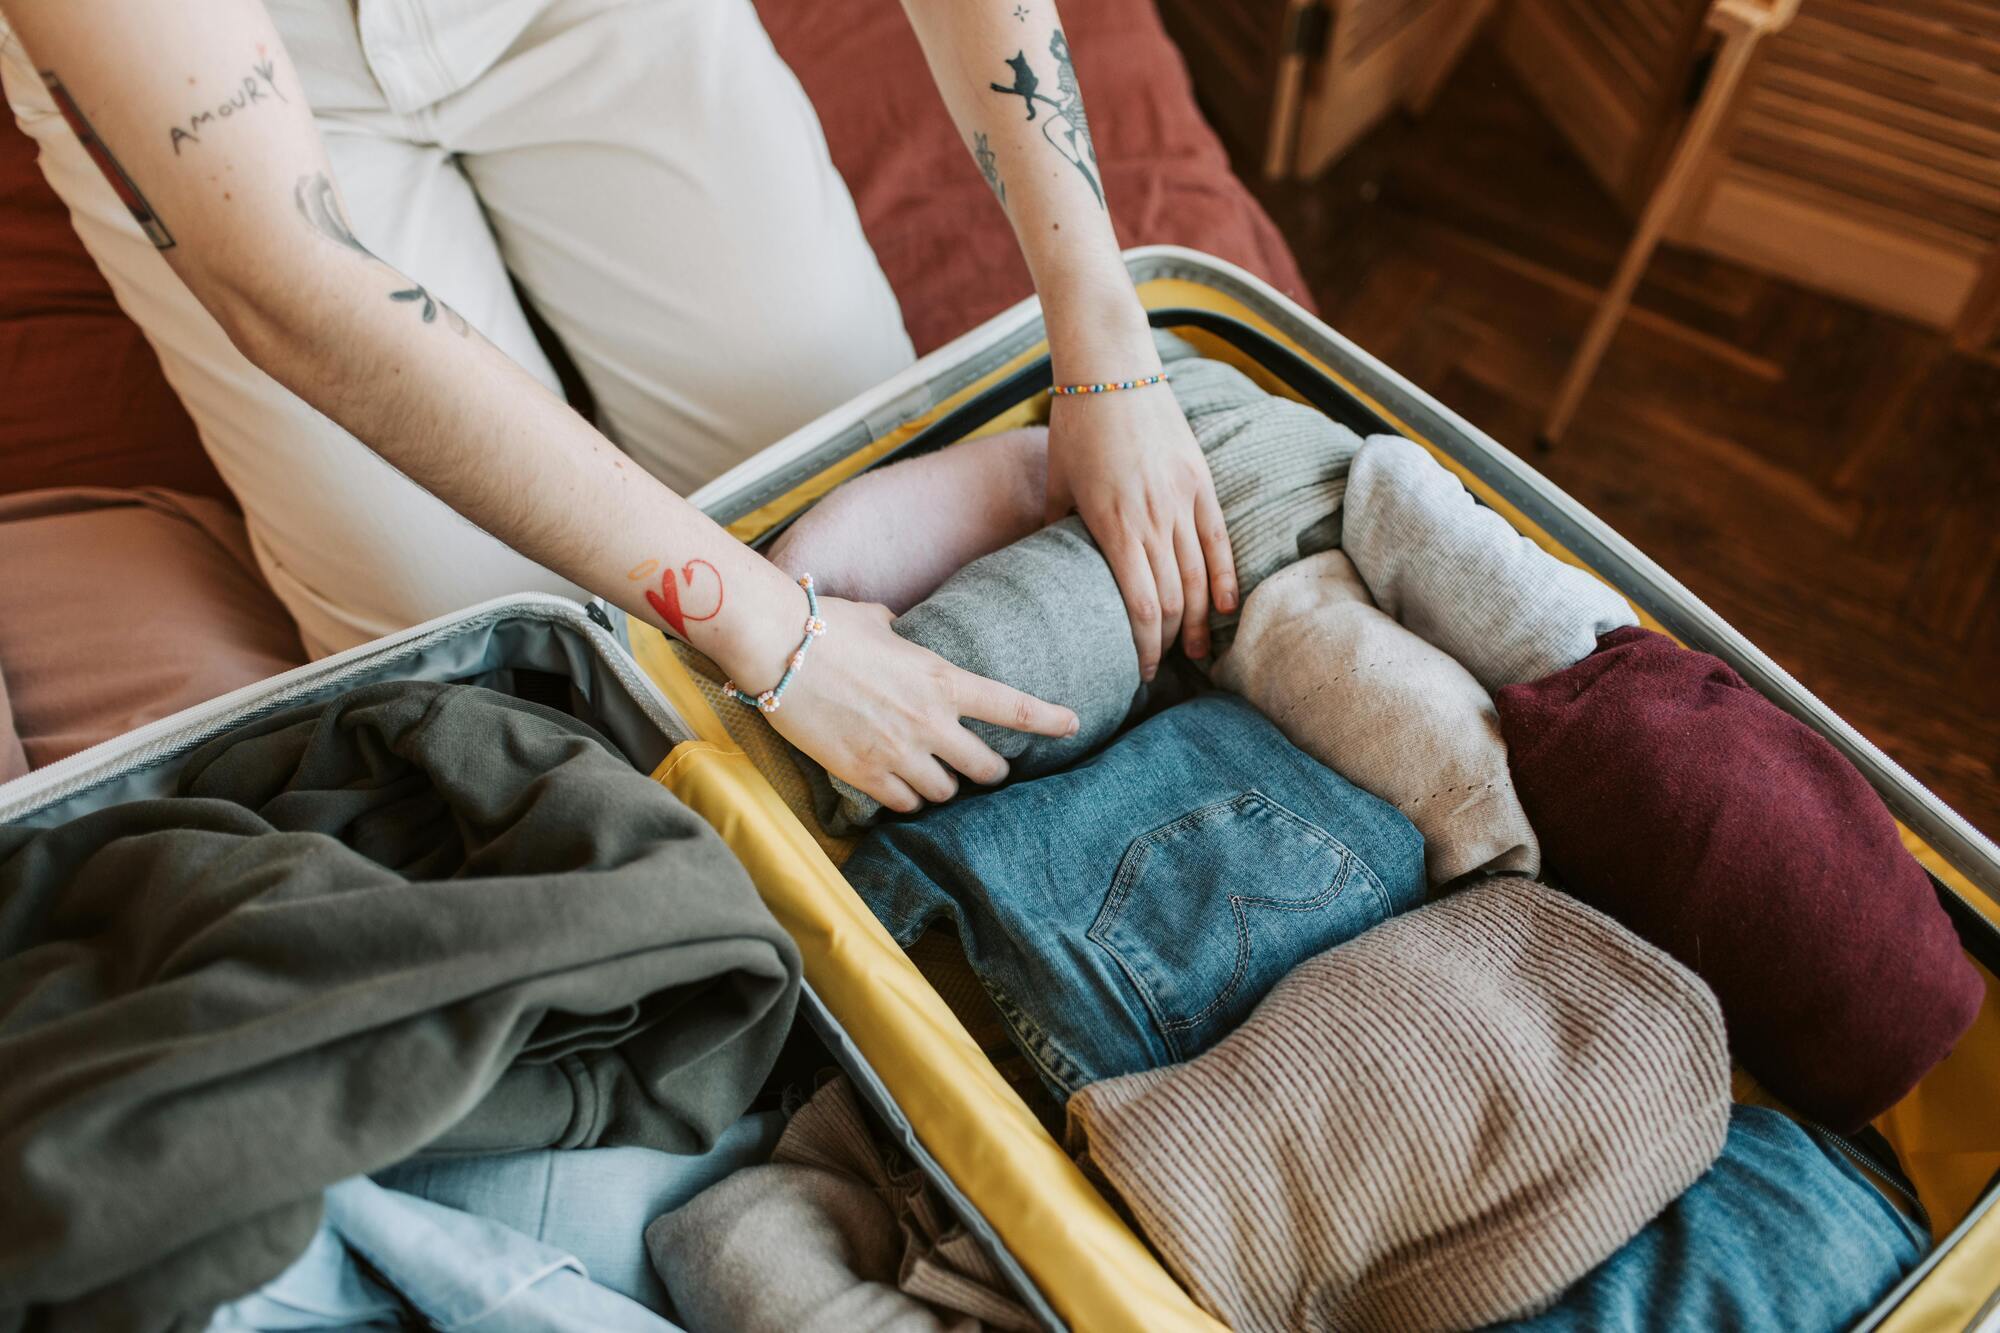 The "5, 4, 3, 2, 1" rule: an expert shared packing advice to help save space in your suitcase